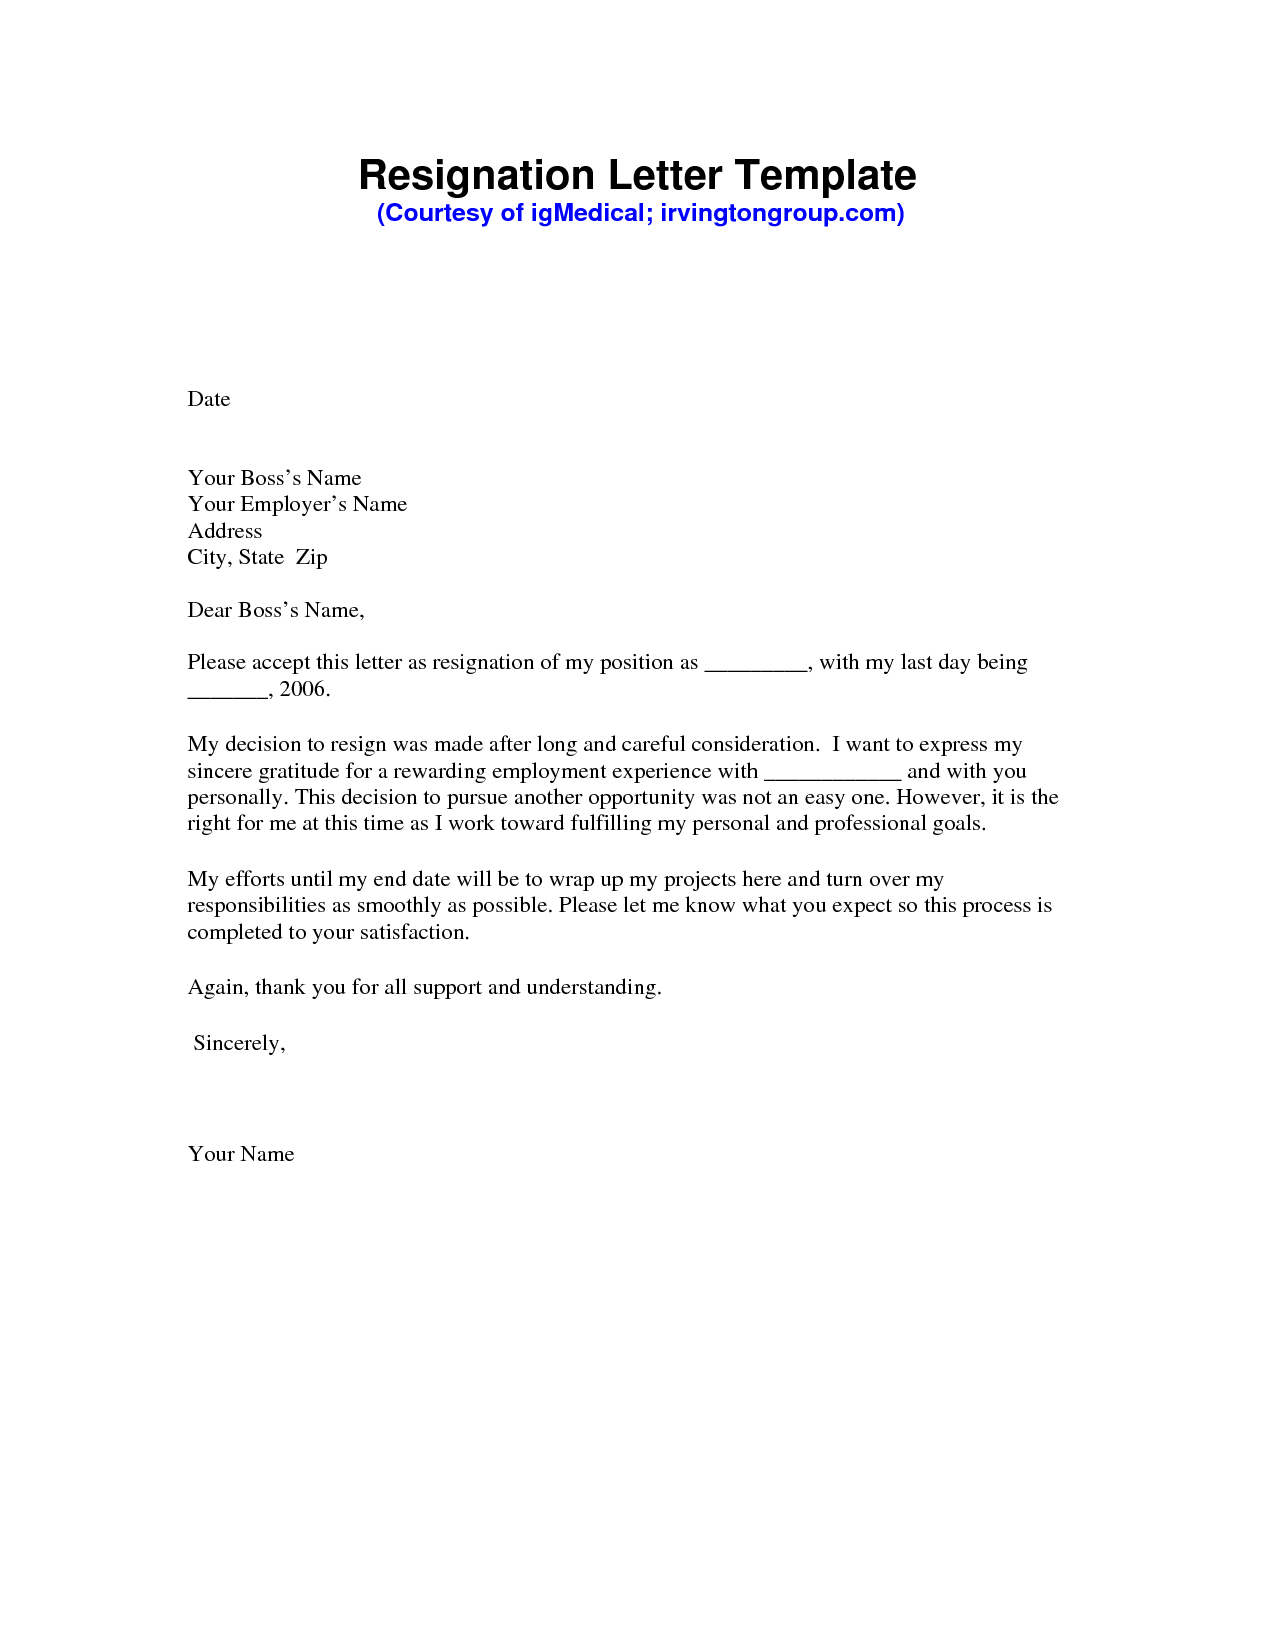 Professional Resignation Letter Template - Resignation Letter Sample Pdf Resignation Letter